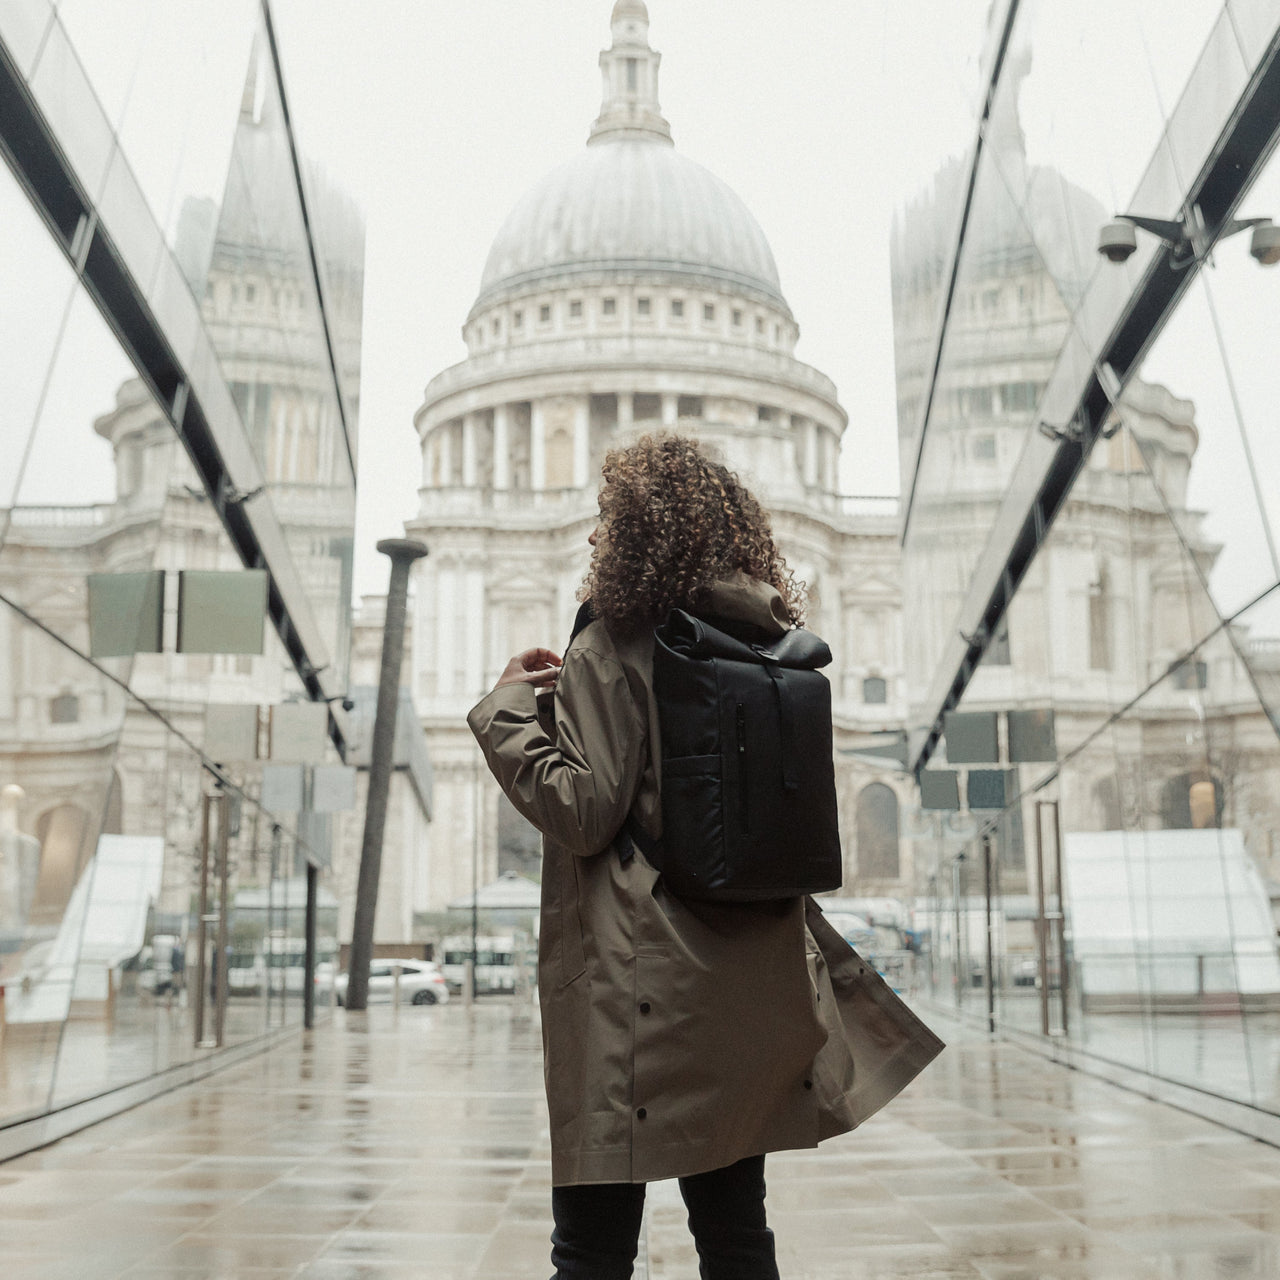 Women in a rain coat stood on a London street, with her back to the camera wearing The Roll Top Mini in All Black.